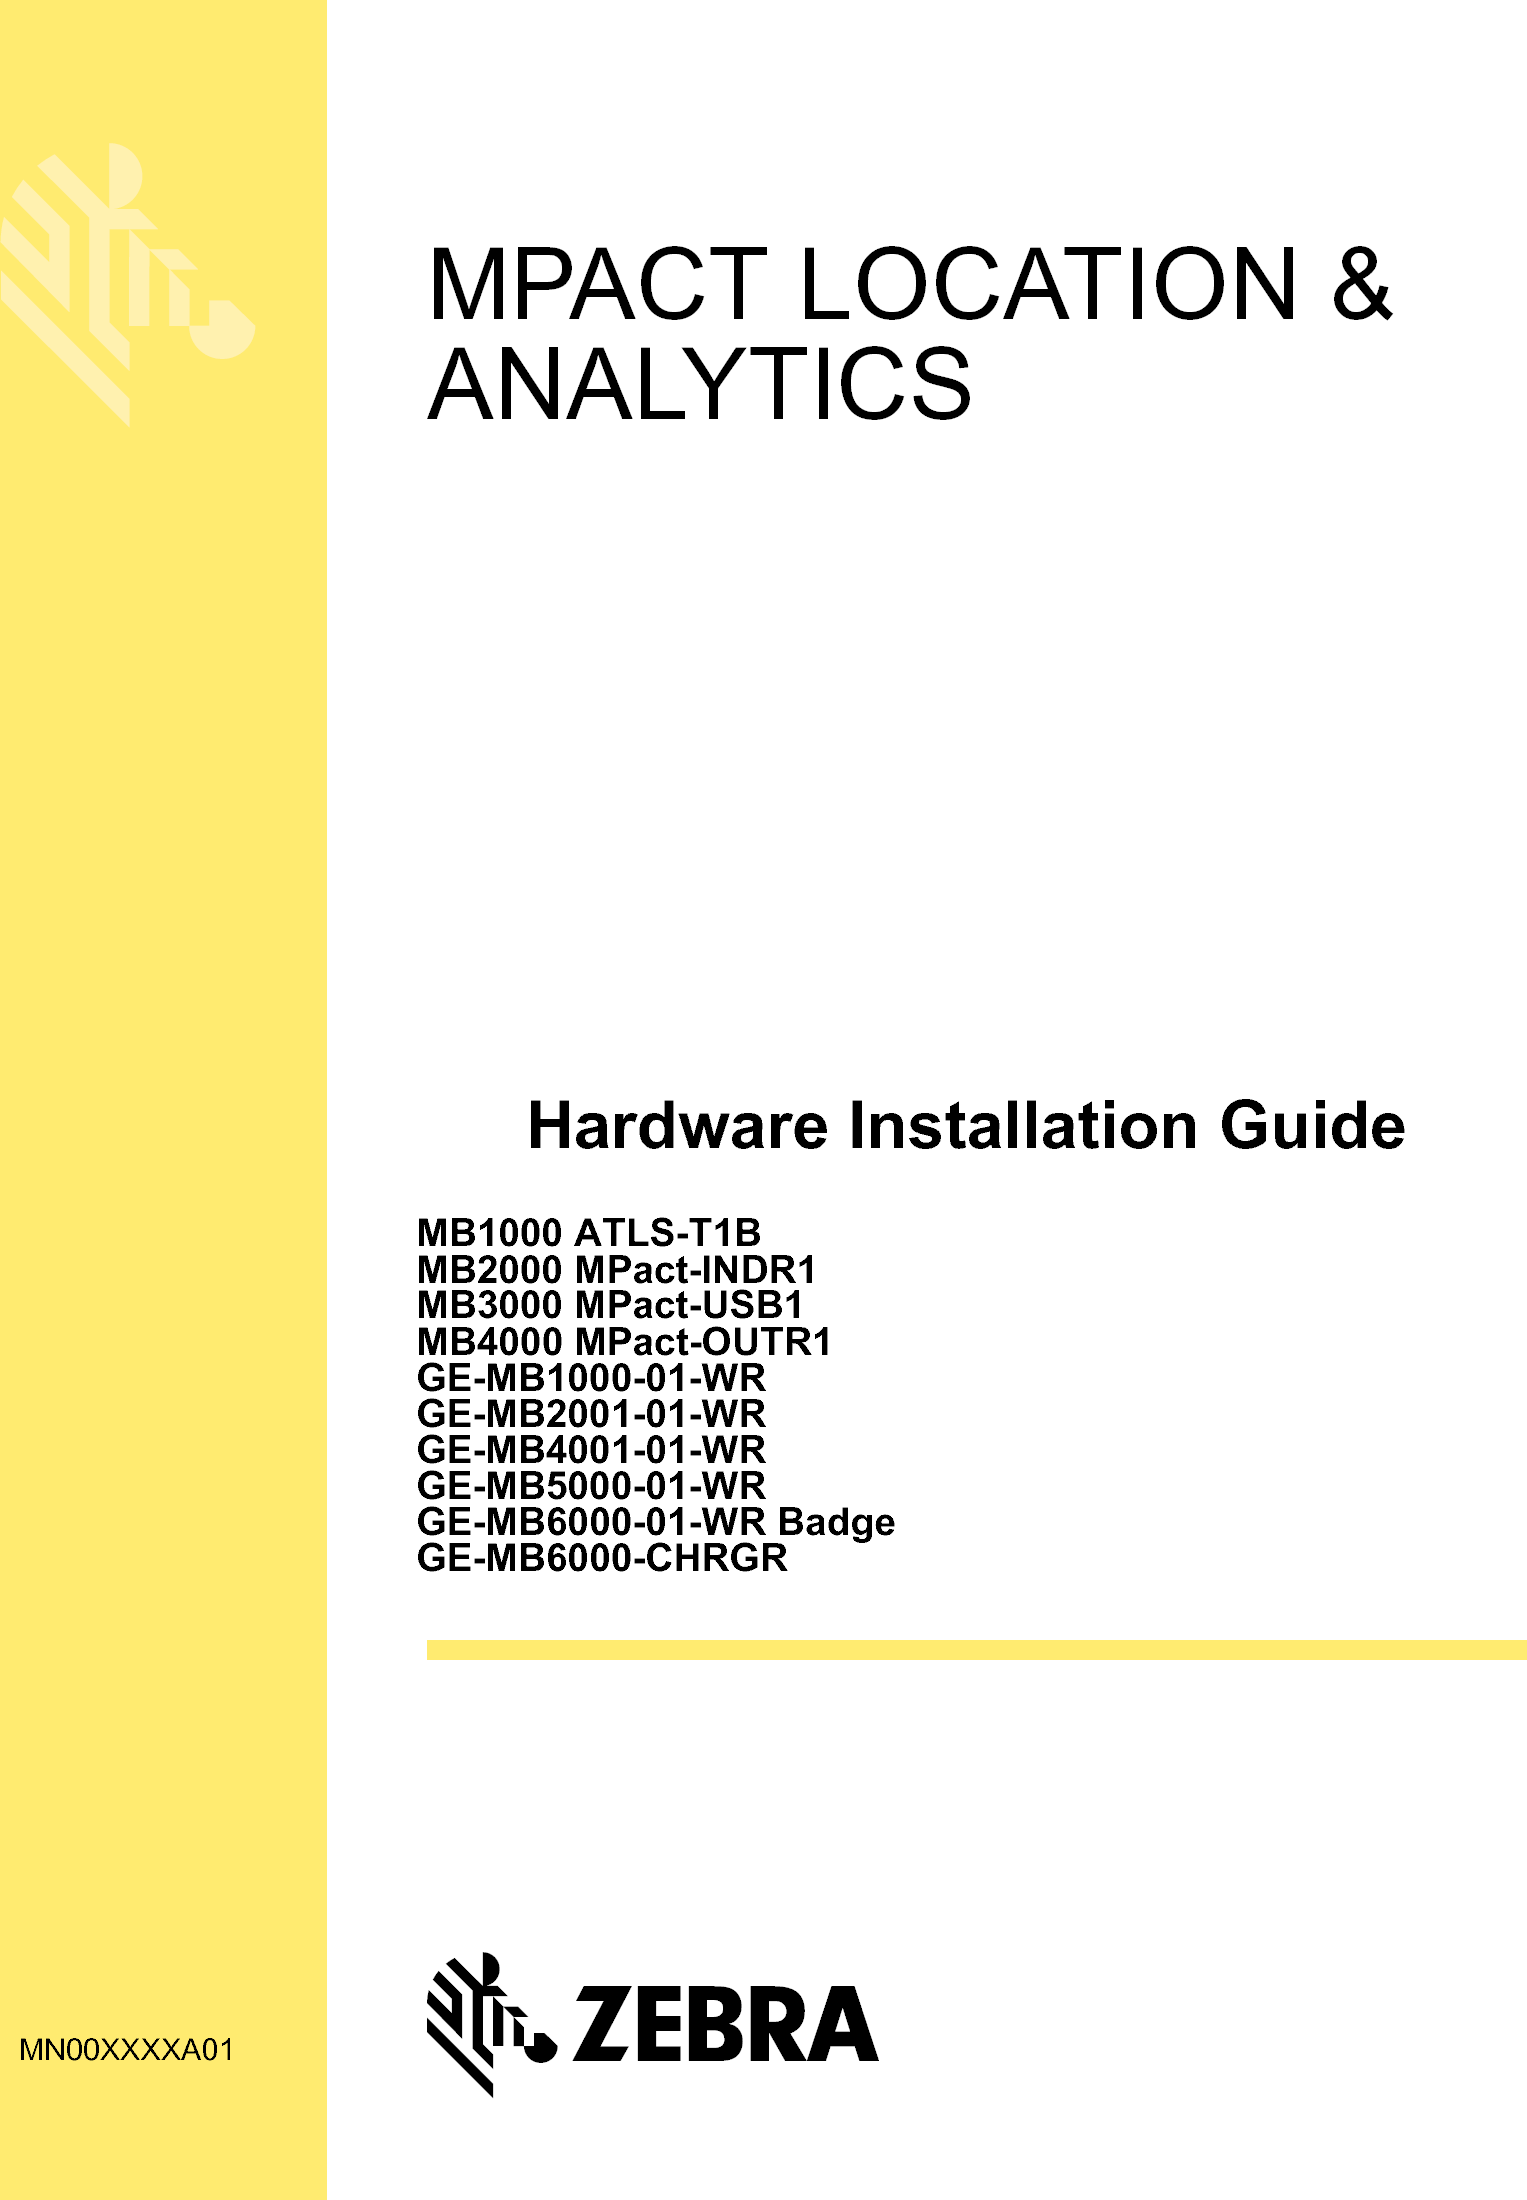 Hardware Installation GuideMB1000 ATLS-T1BMB2000 MPact-INDR1MB3000 MPact-USB1MB4000 MPact-OUTR1 GE-MB1000-01-WR GE-MB2001-01-WR GE-MB4001-01-WR GE-MB5000-01-WR GE-MB6000-01-WR Badge GE-MB6000-CHRGRMPACT LOCATION &amp; ANALYTICSMN00XXXXA01